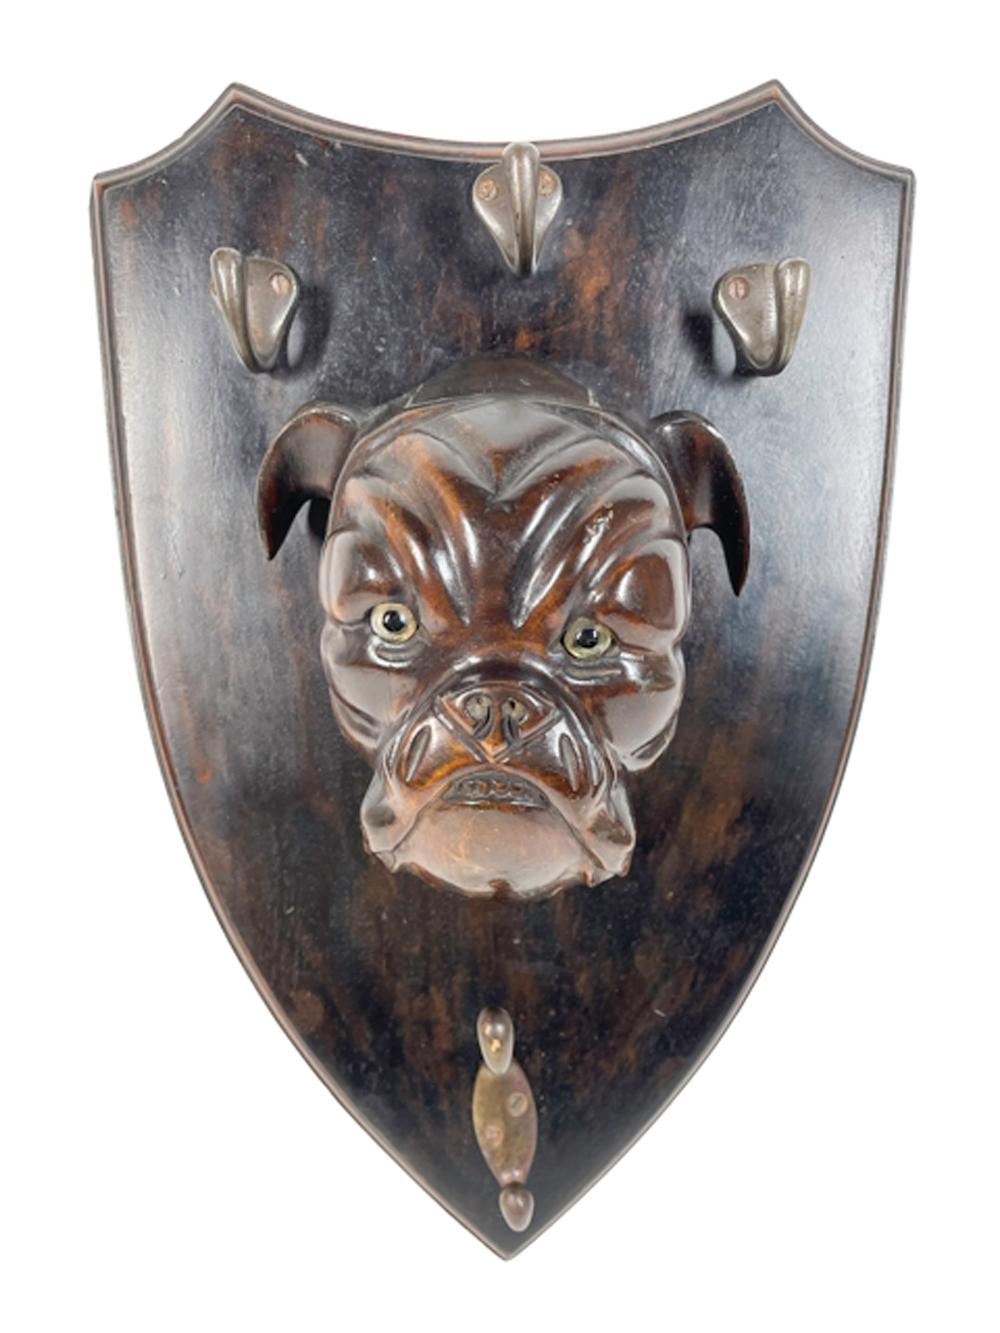 19th Century 19th C Shield-Backed Lead/Leash Holder, Carved Wood Bulldog Head with Glass Eyes For Sale